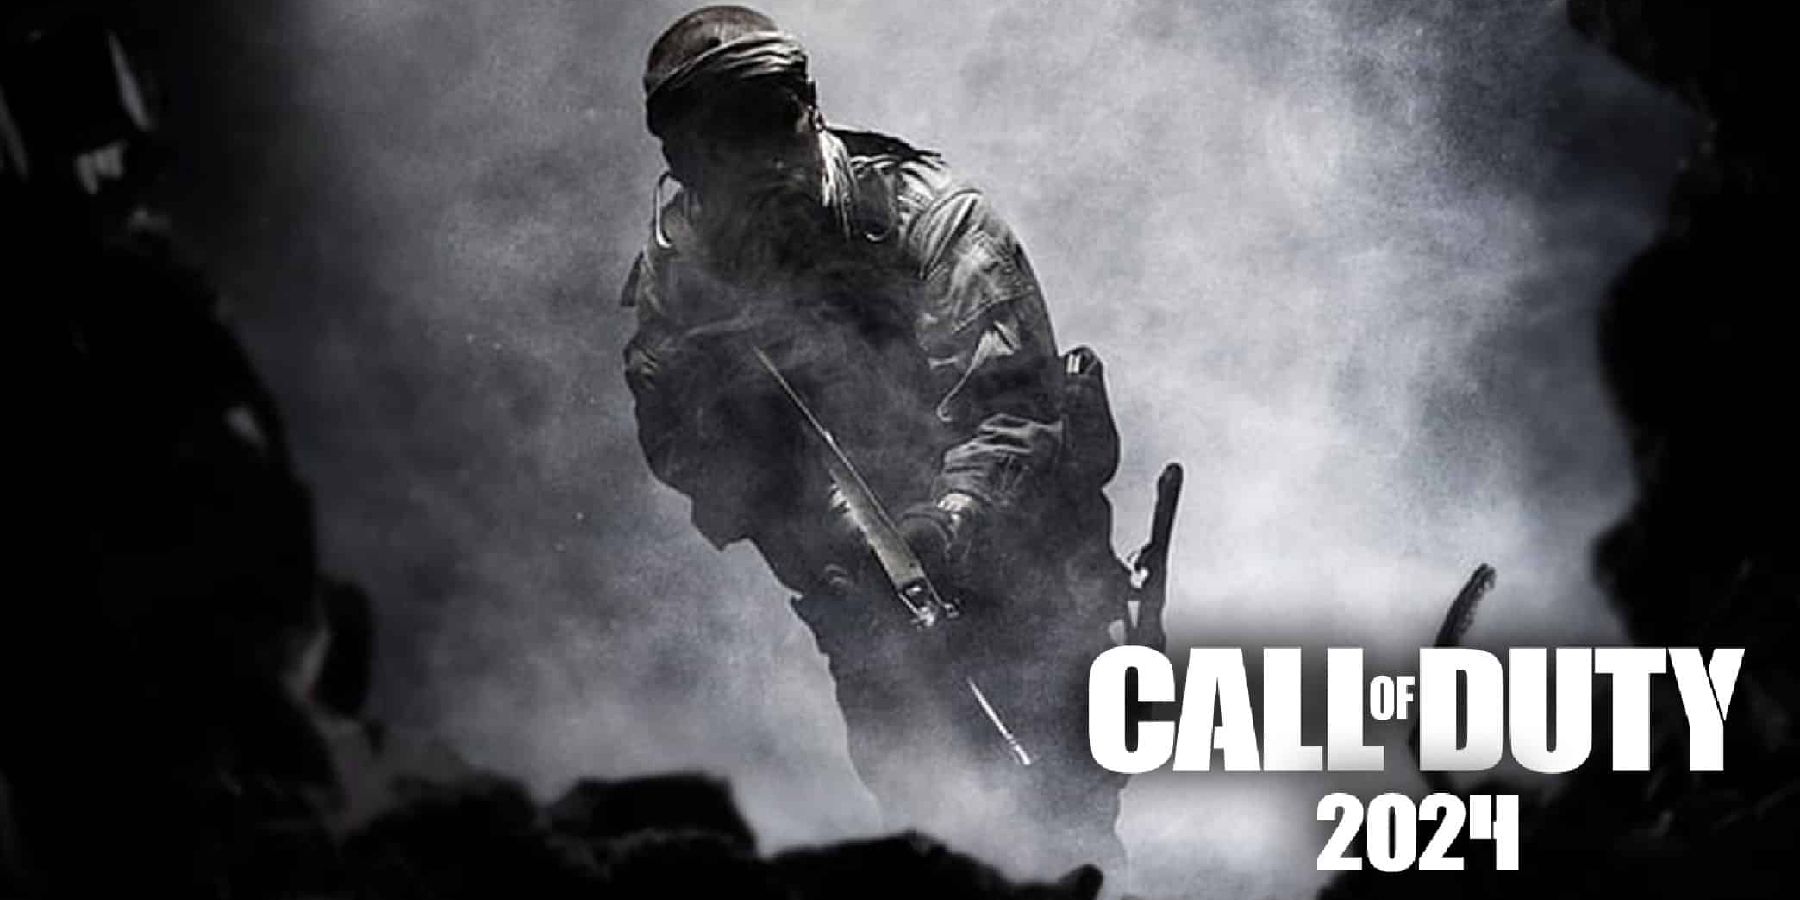 What to Expect From Call of Duty 2024 Next Year